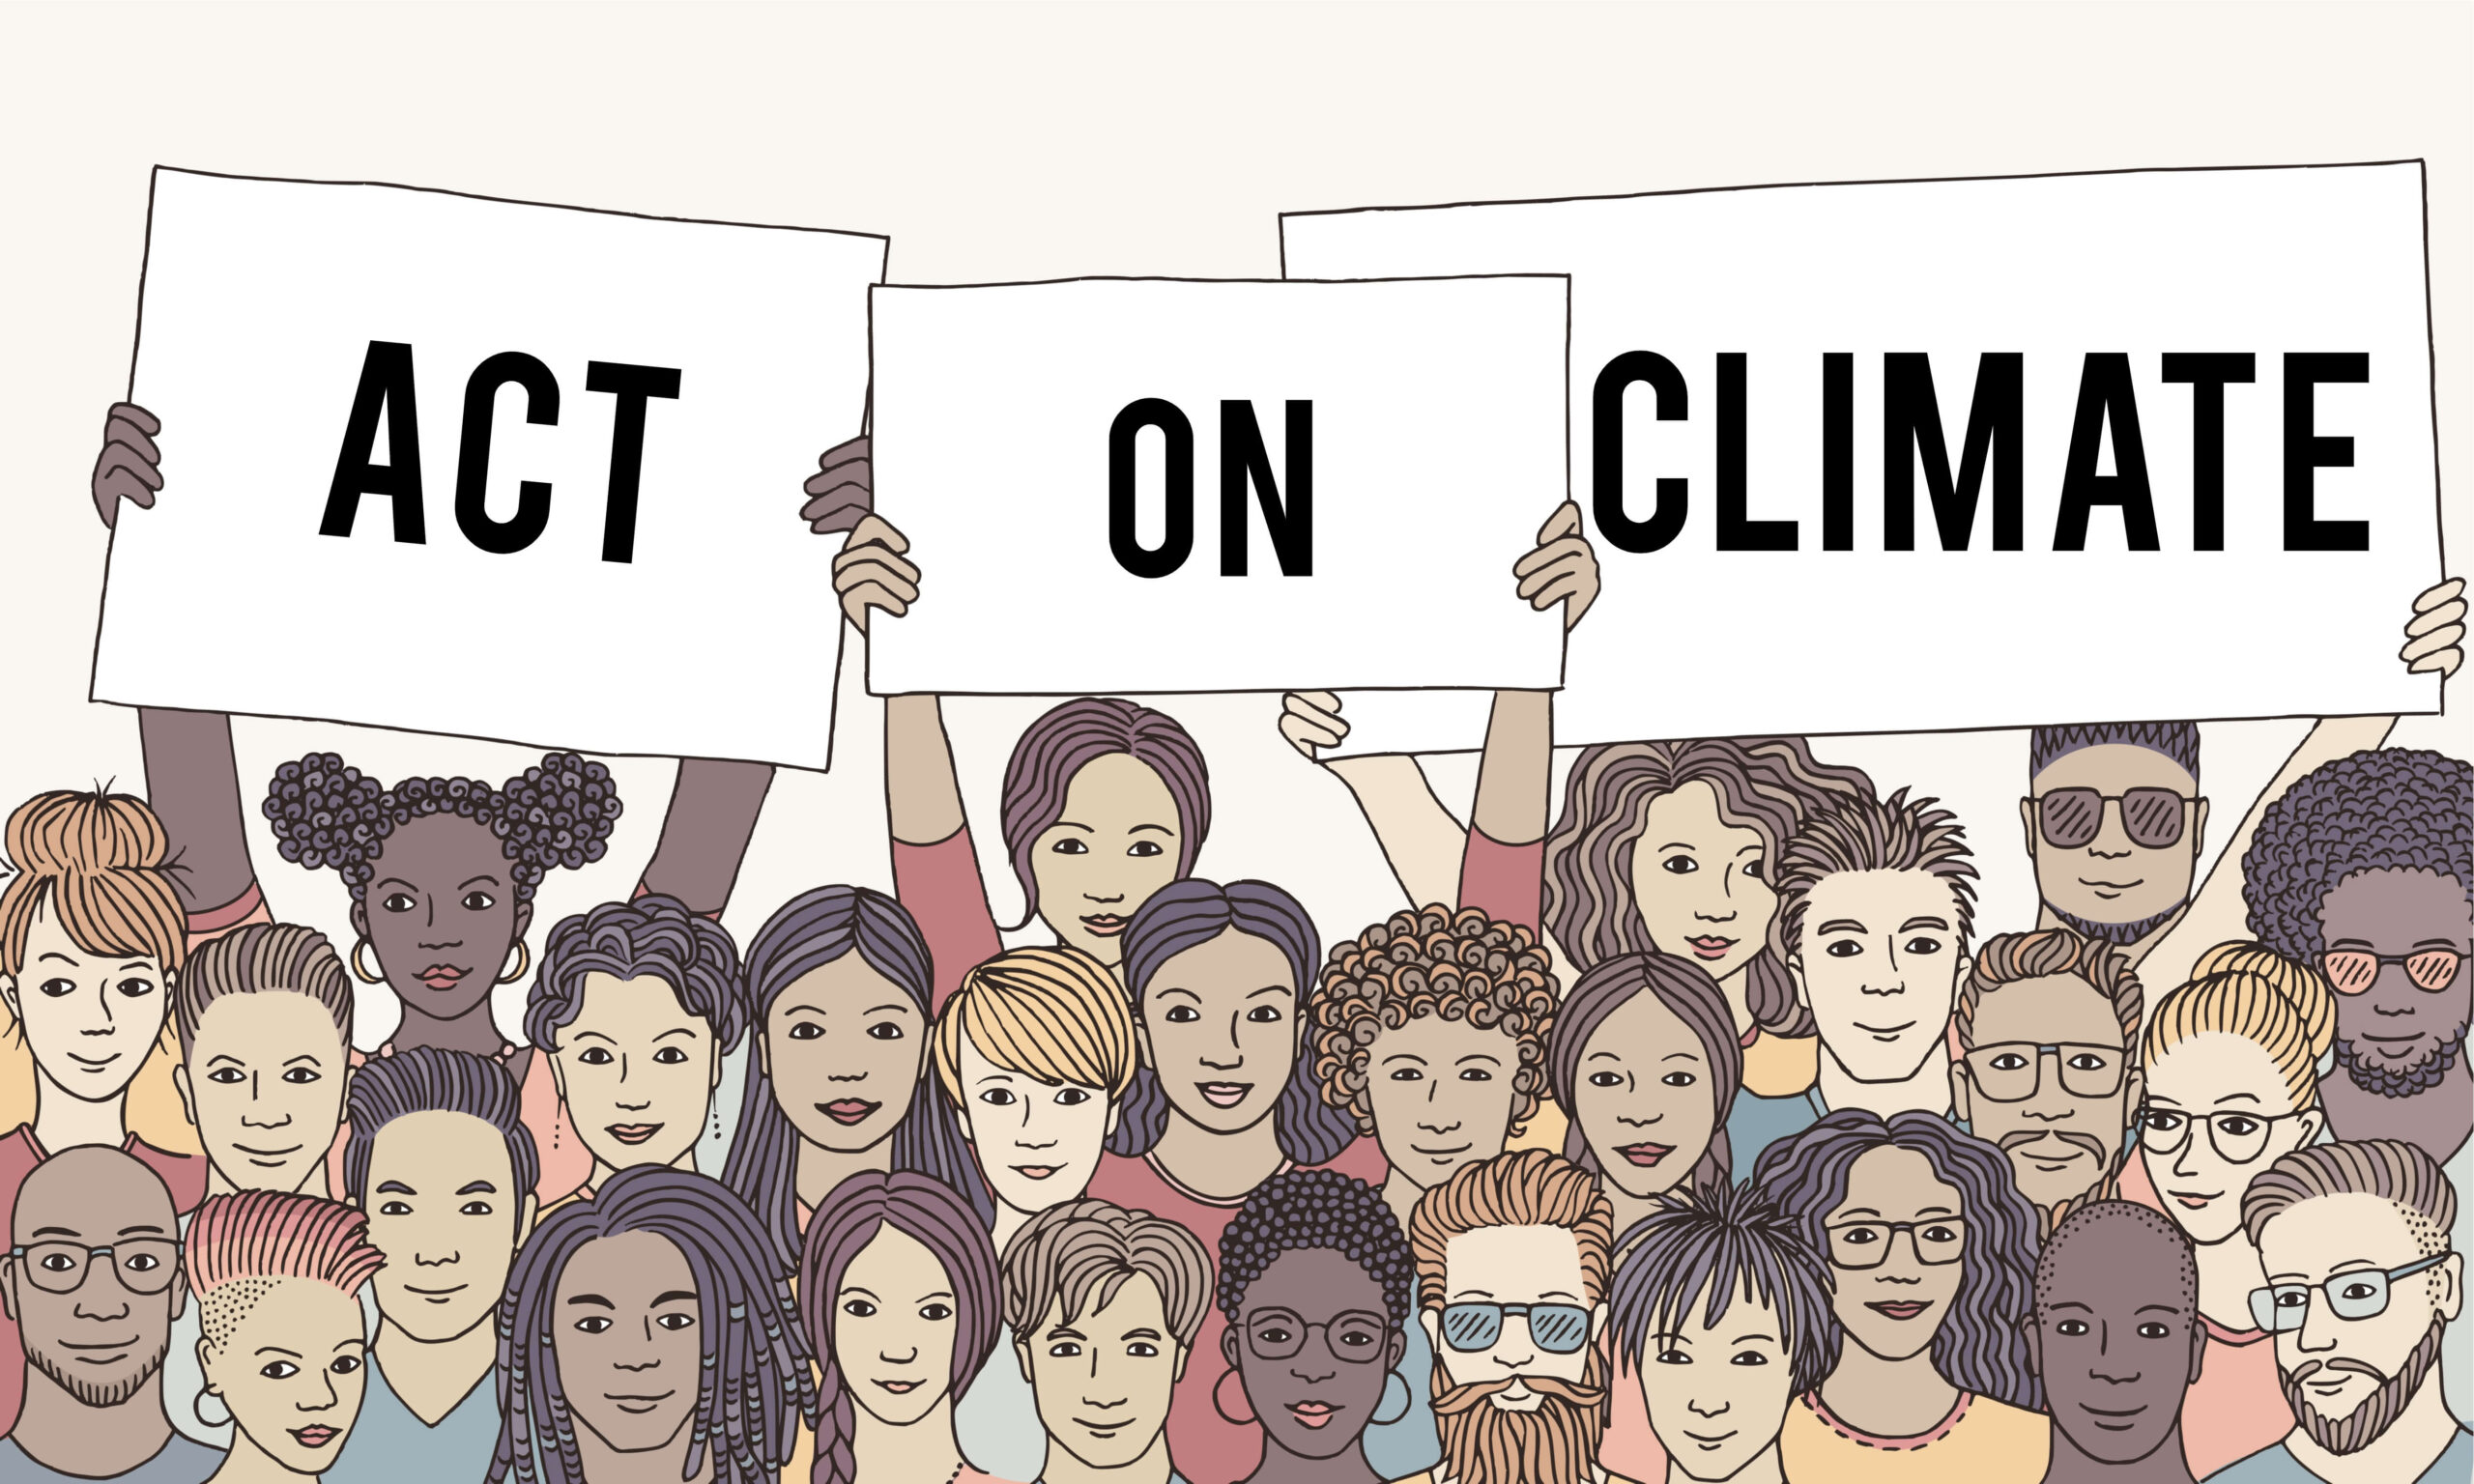 Act on Climate: A call to action